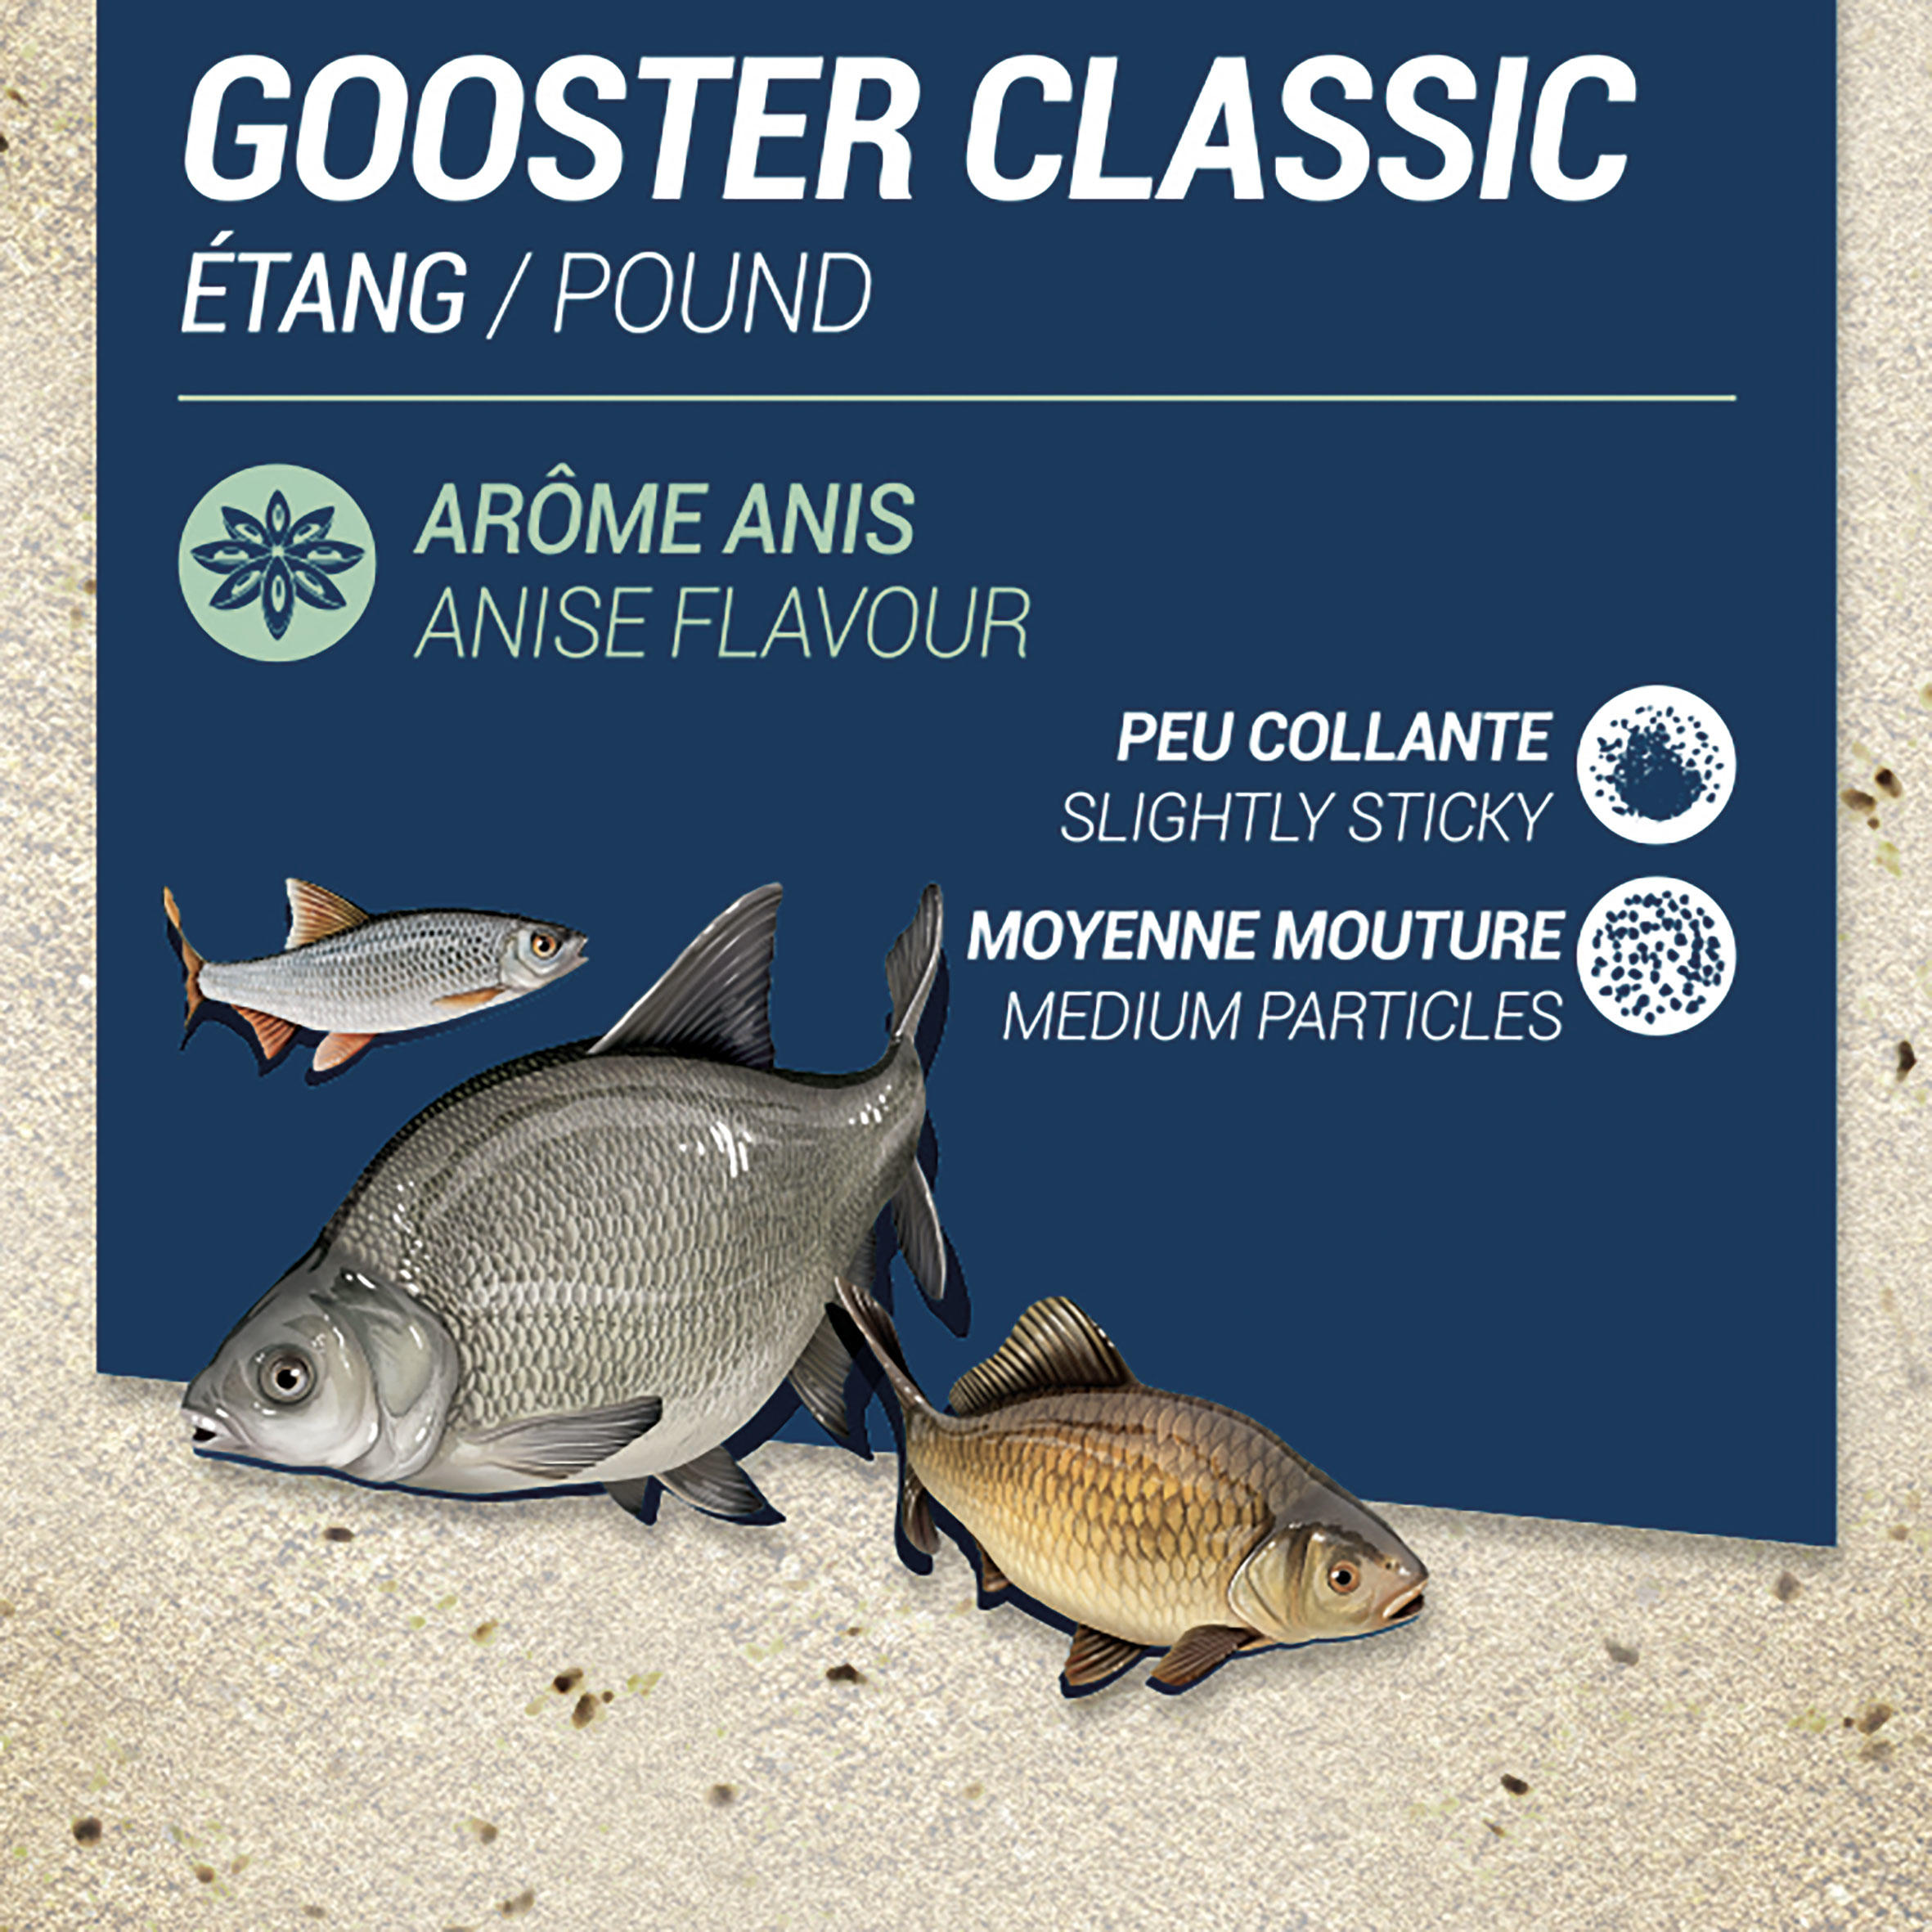 GOOSTER CLASSIC BAIT FOR ALL FISH ANISE 4,75kg 2/5